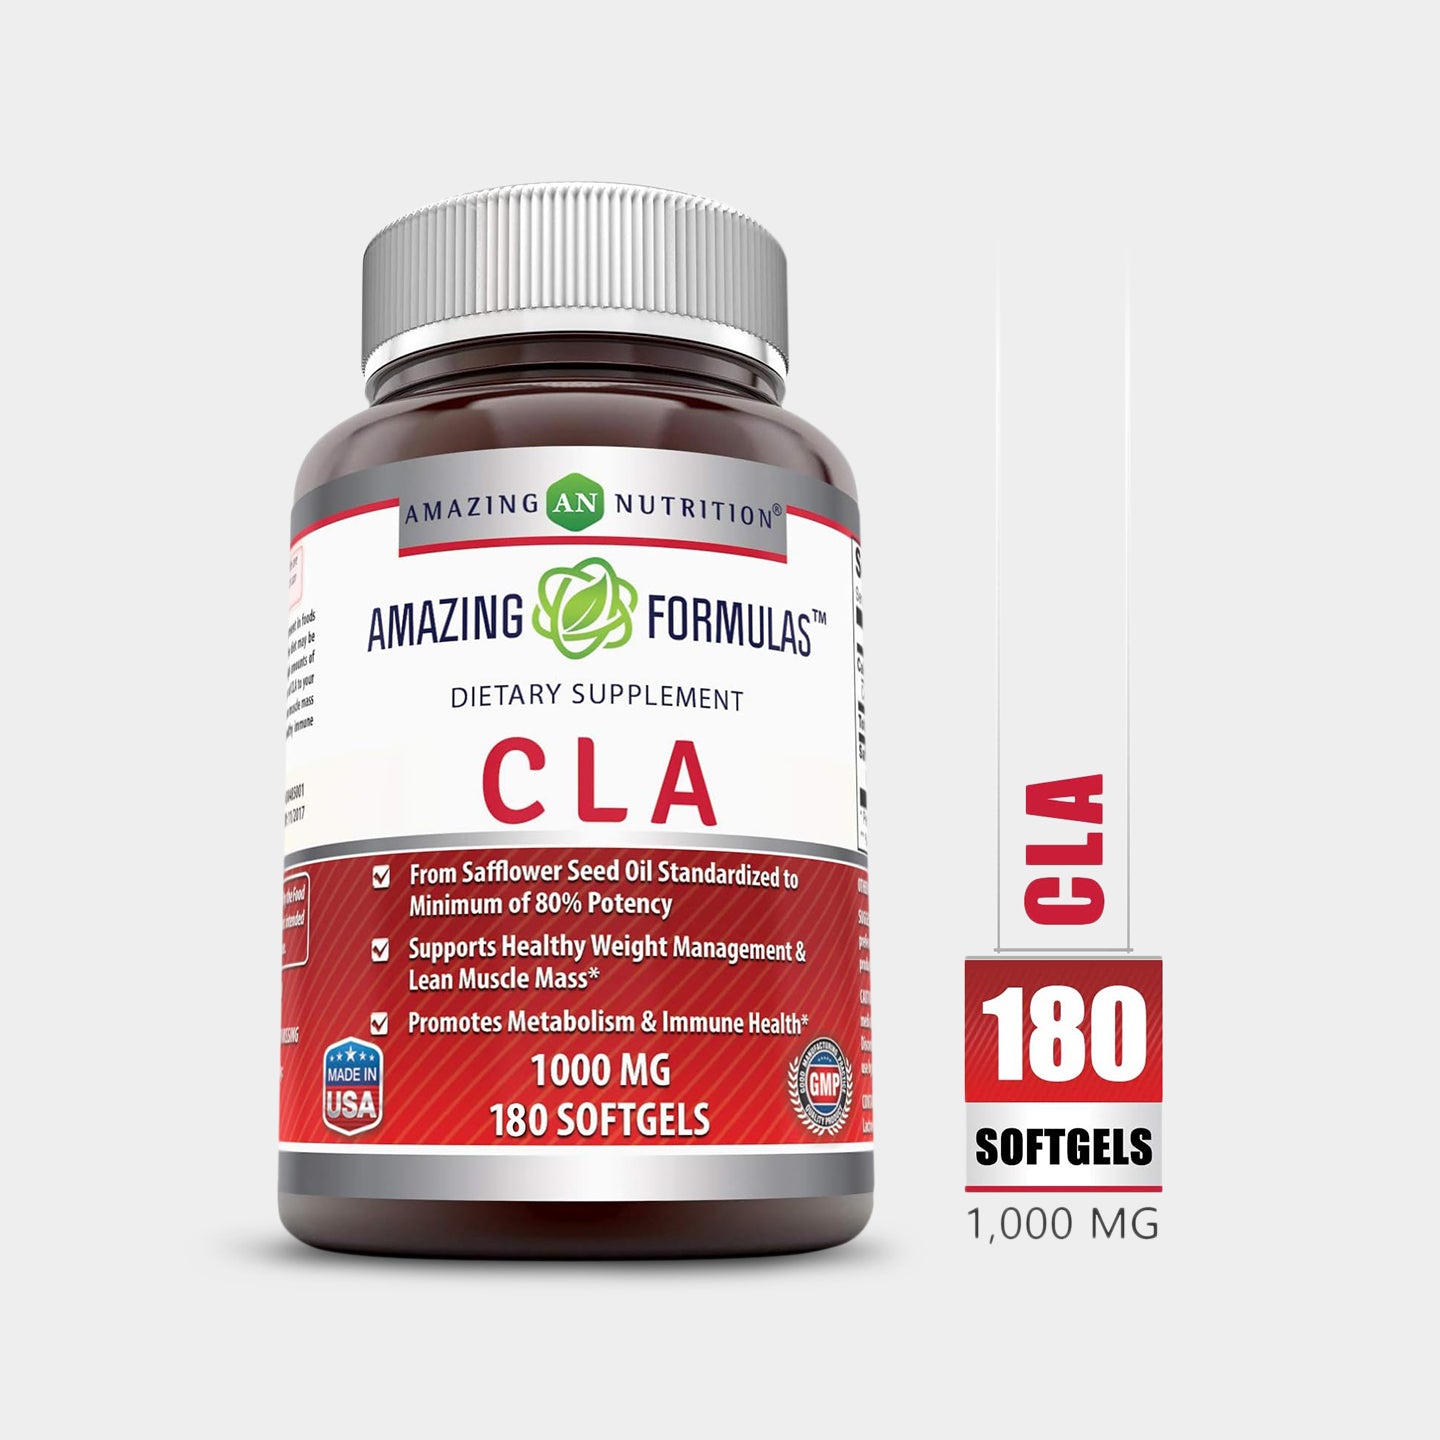 Amazing Nutrition Amazing Formulas CLA 1000 Mg, Unflavored, 180 Softgels A1